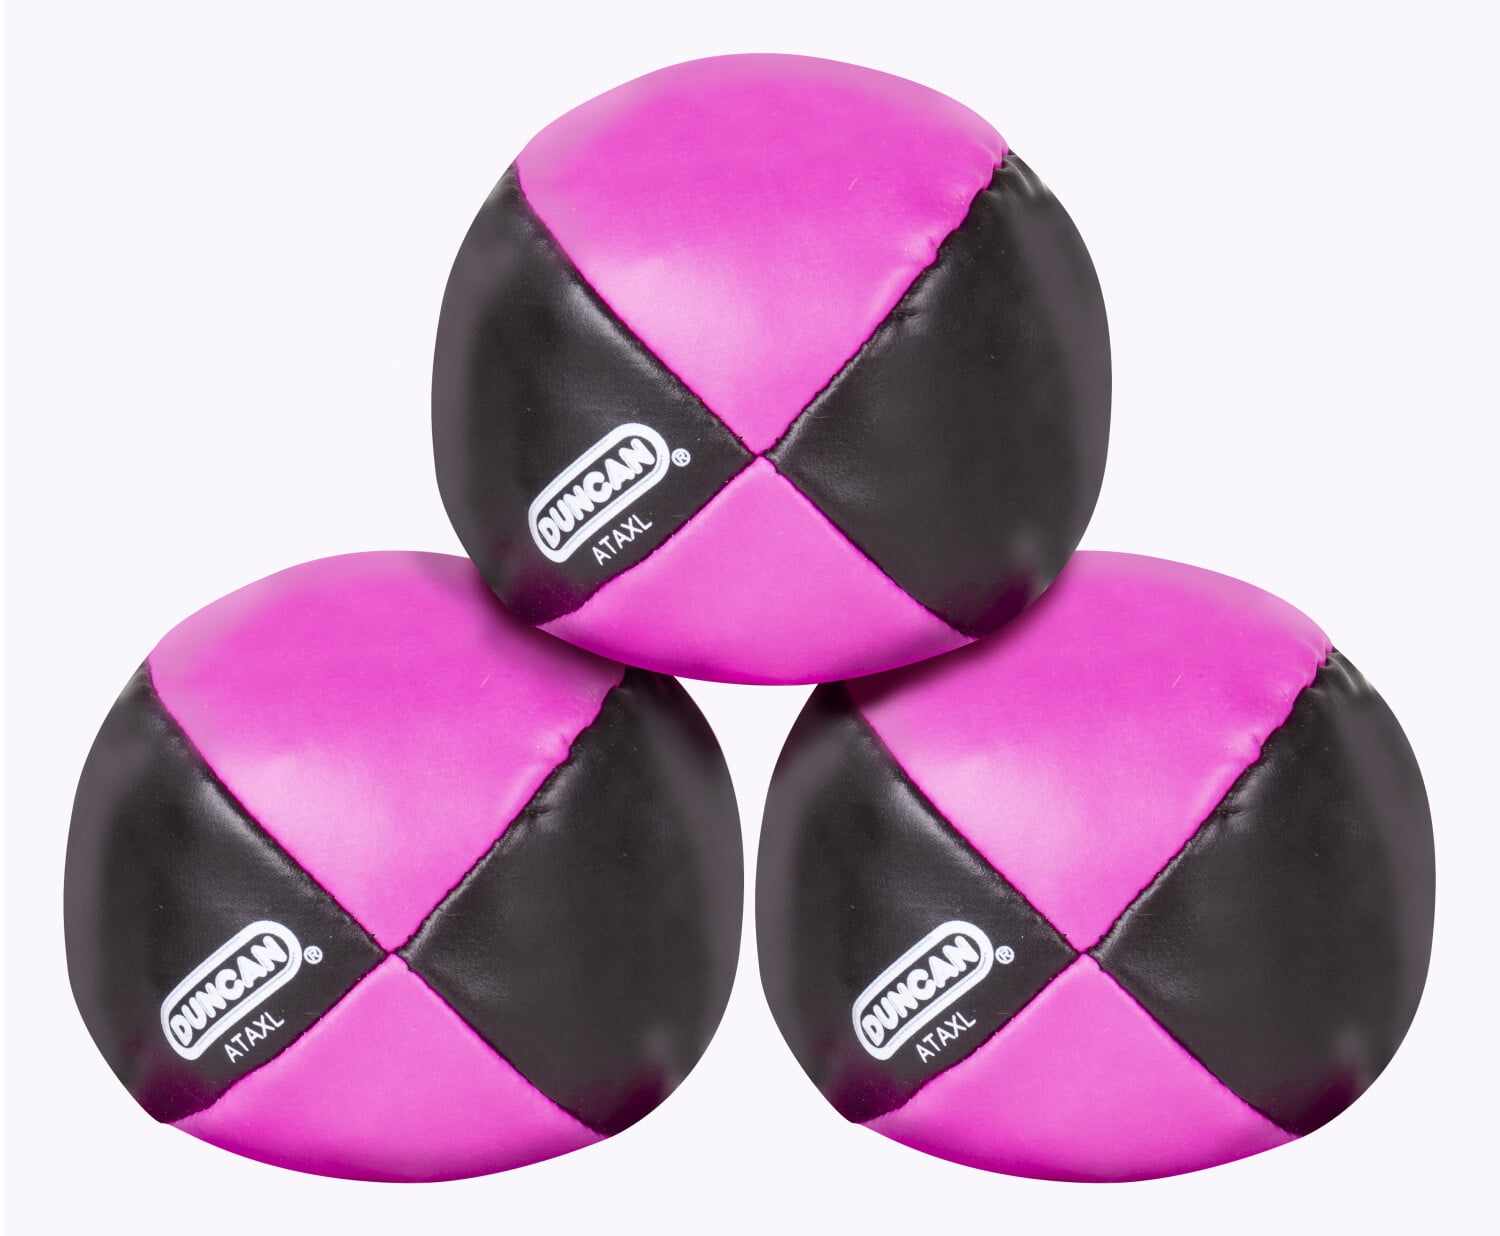 New Circus Juggling Balls Pack of 3 Brand New Including Instructions 5cm 